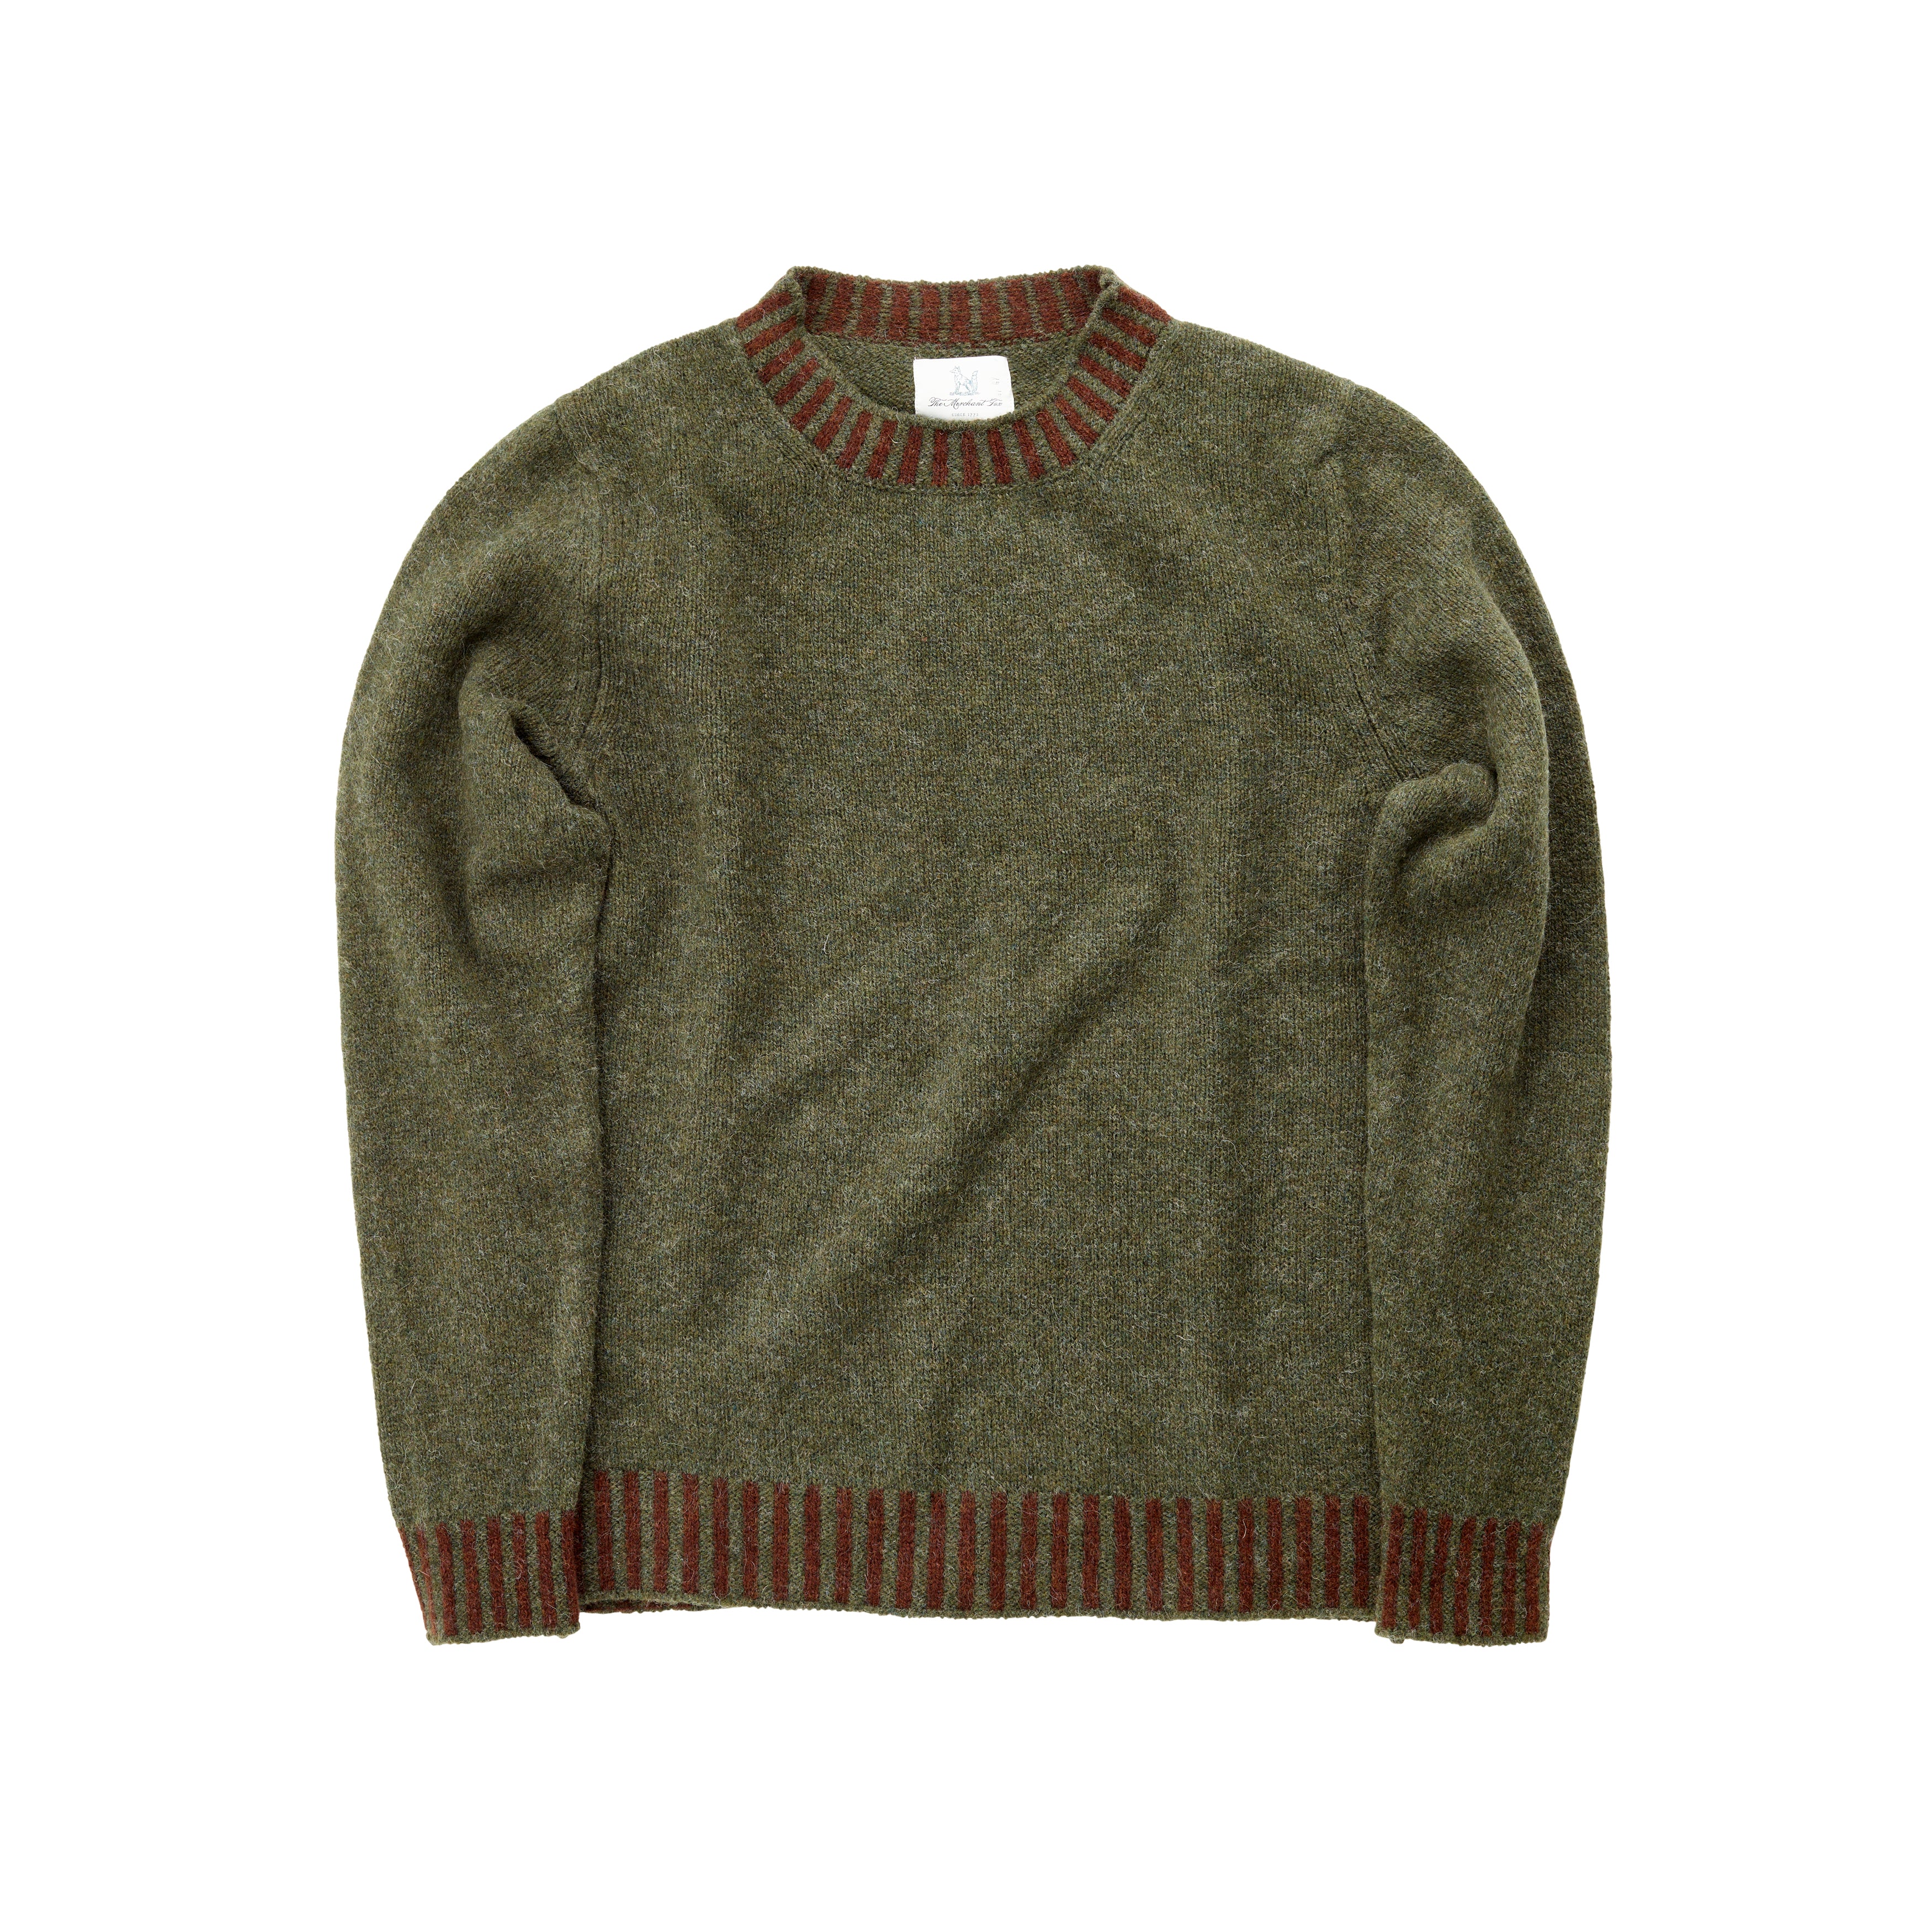 The Jedburgh Sweater in Scots Pine